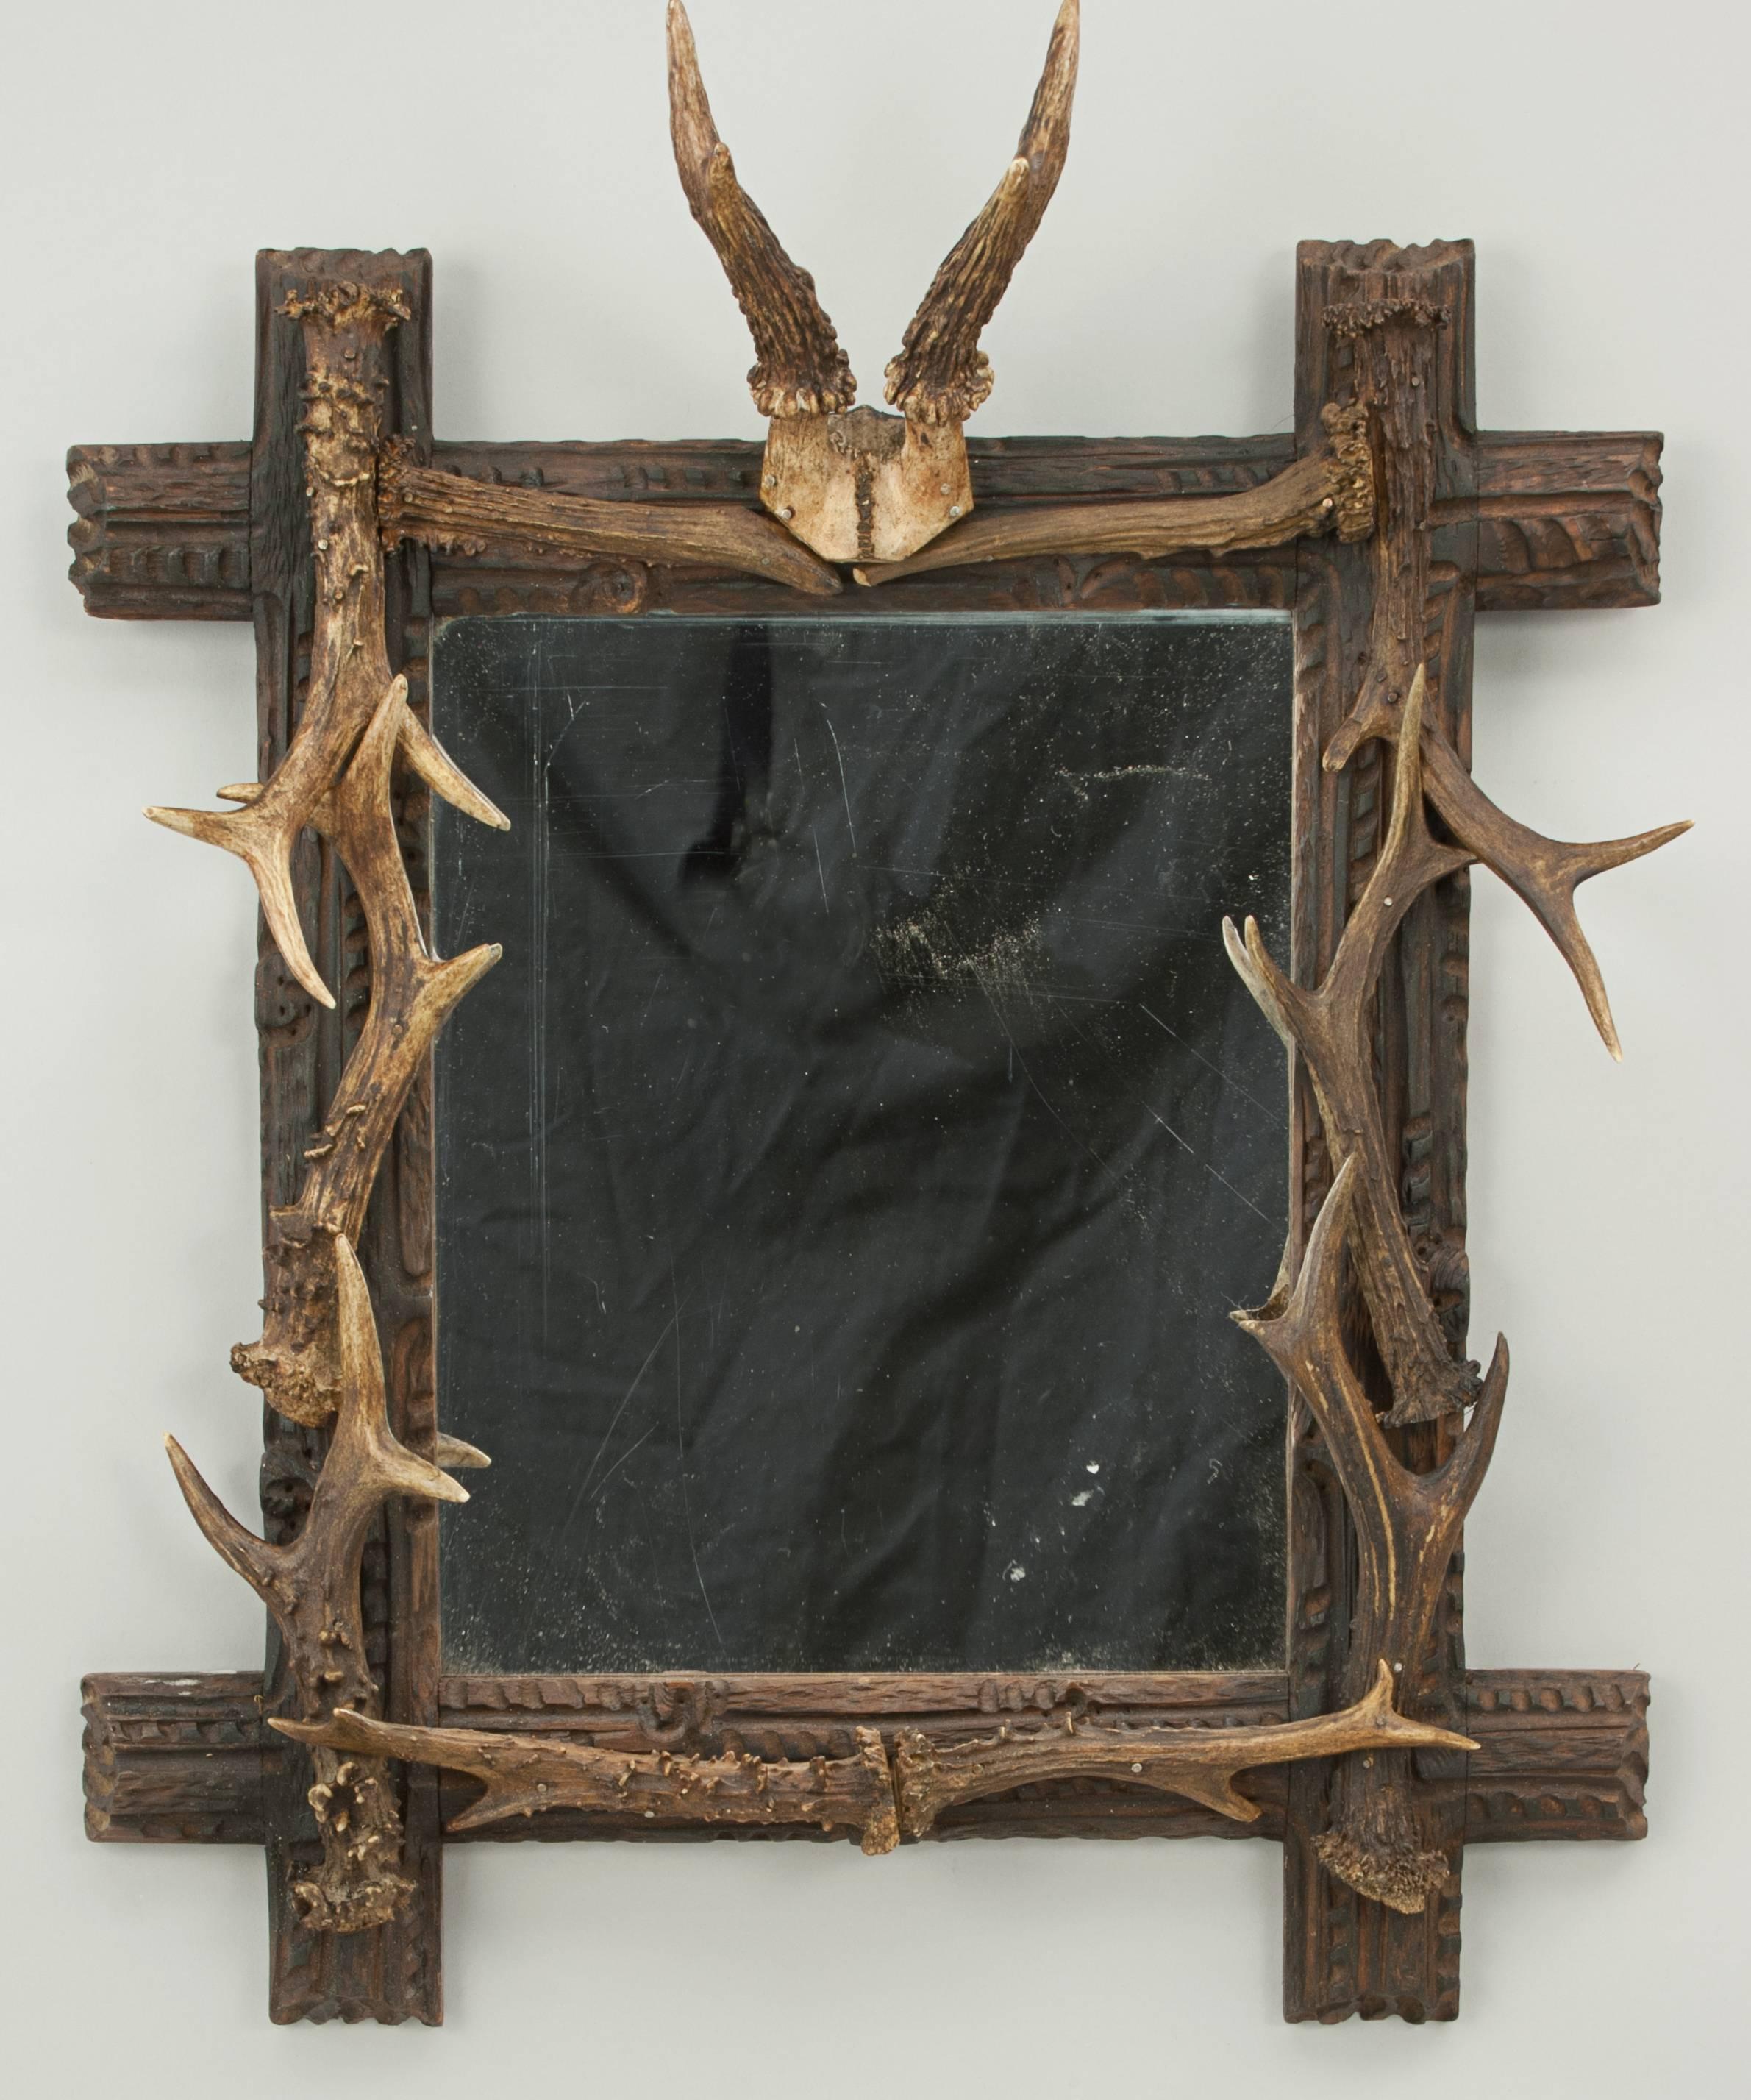 A fine Black Forest style wall mirror decorated with roe deer antlers. The 'Oxford' framed mirror is made of lime wood and has a small scull cap with antlers top centre, with several antlers fix around the outside. A rather attractive taxidermy